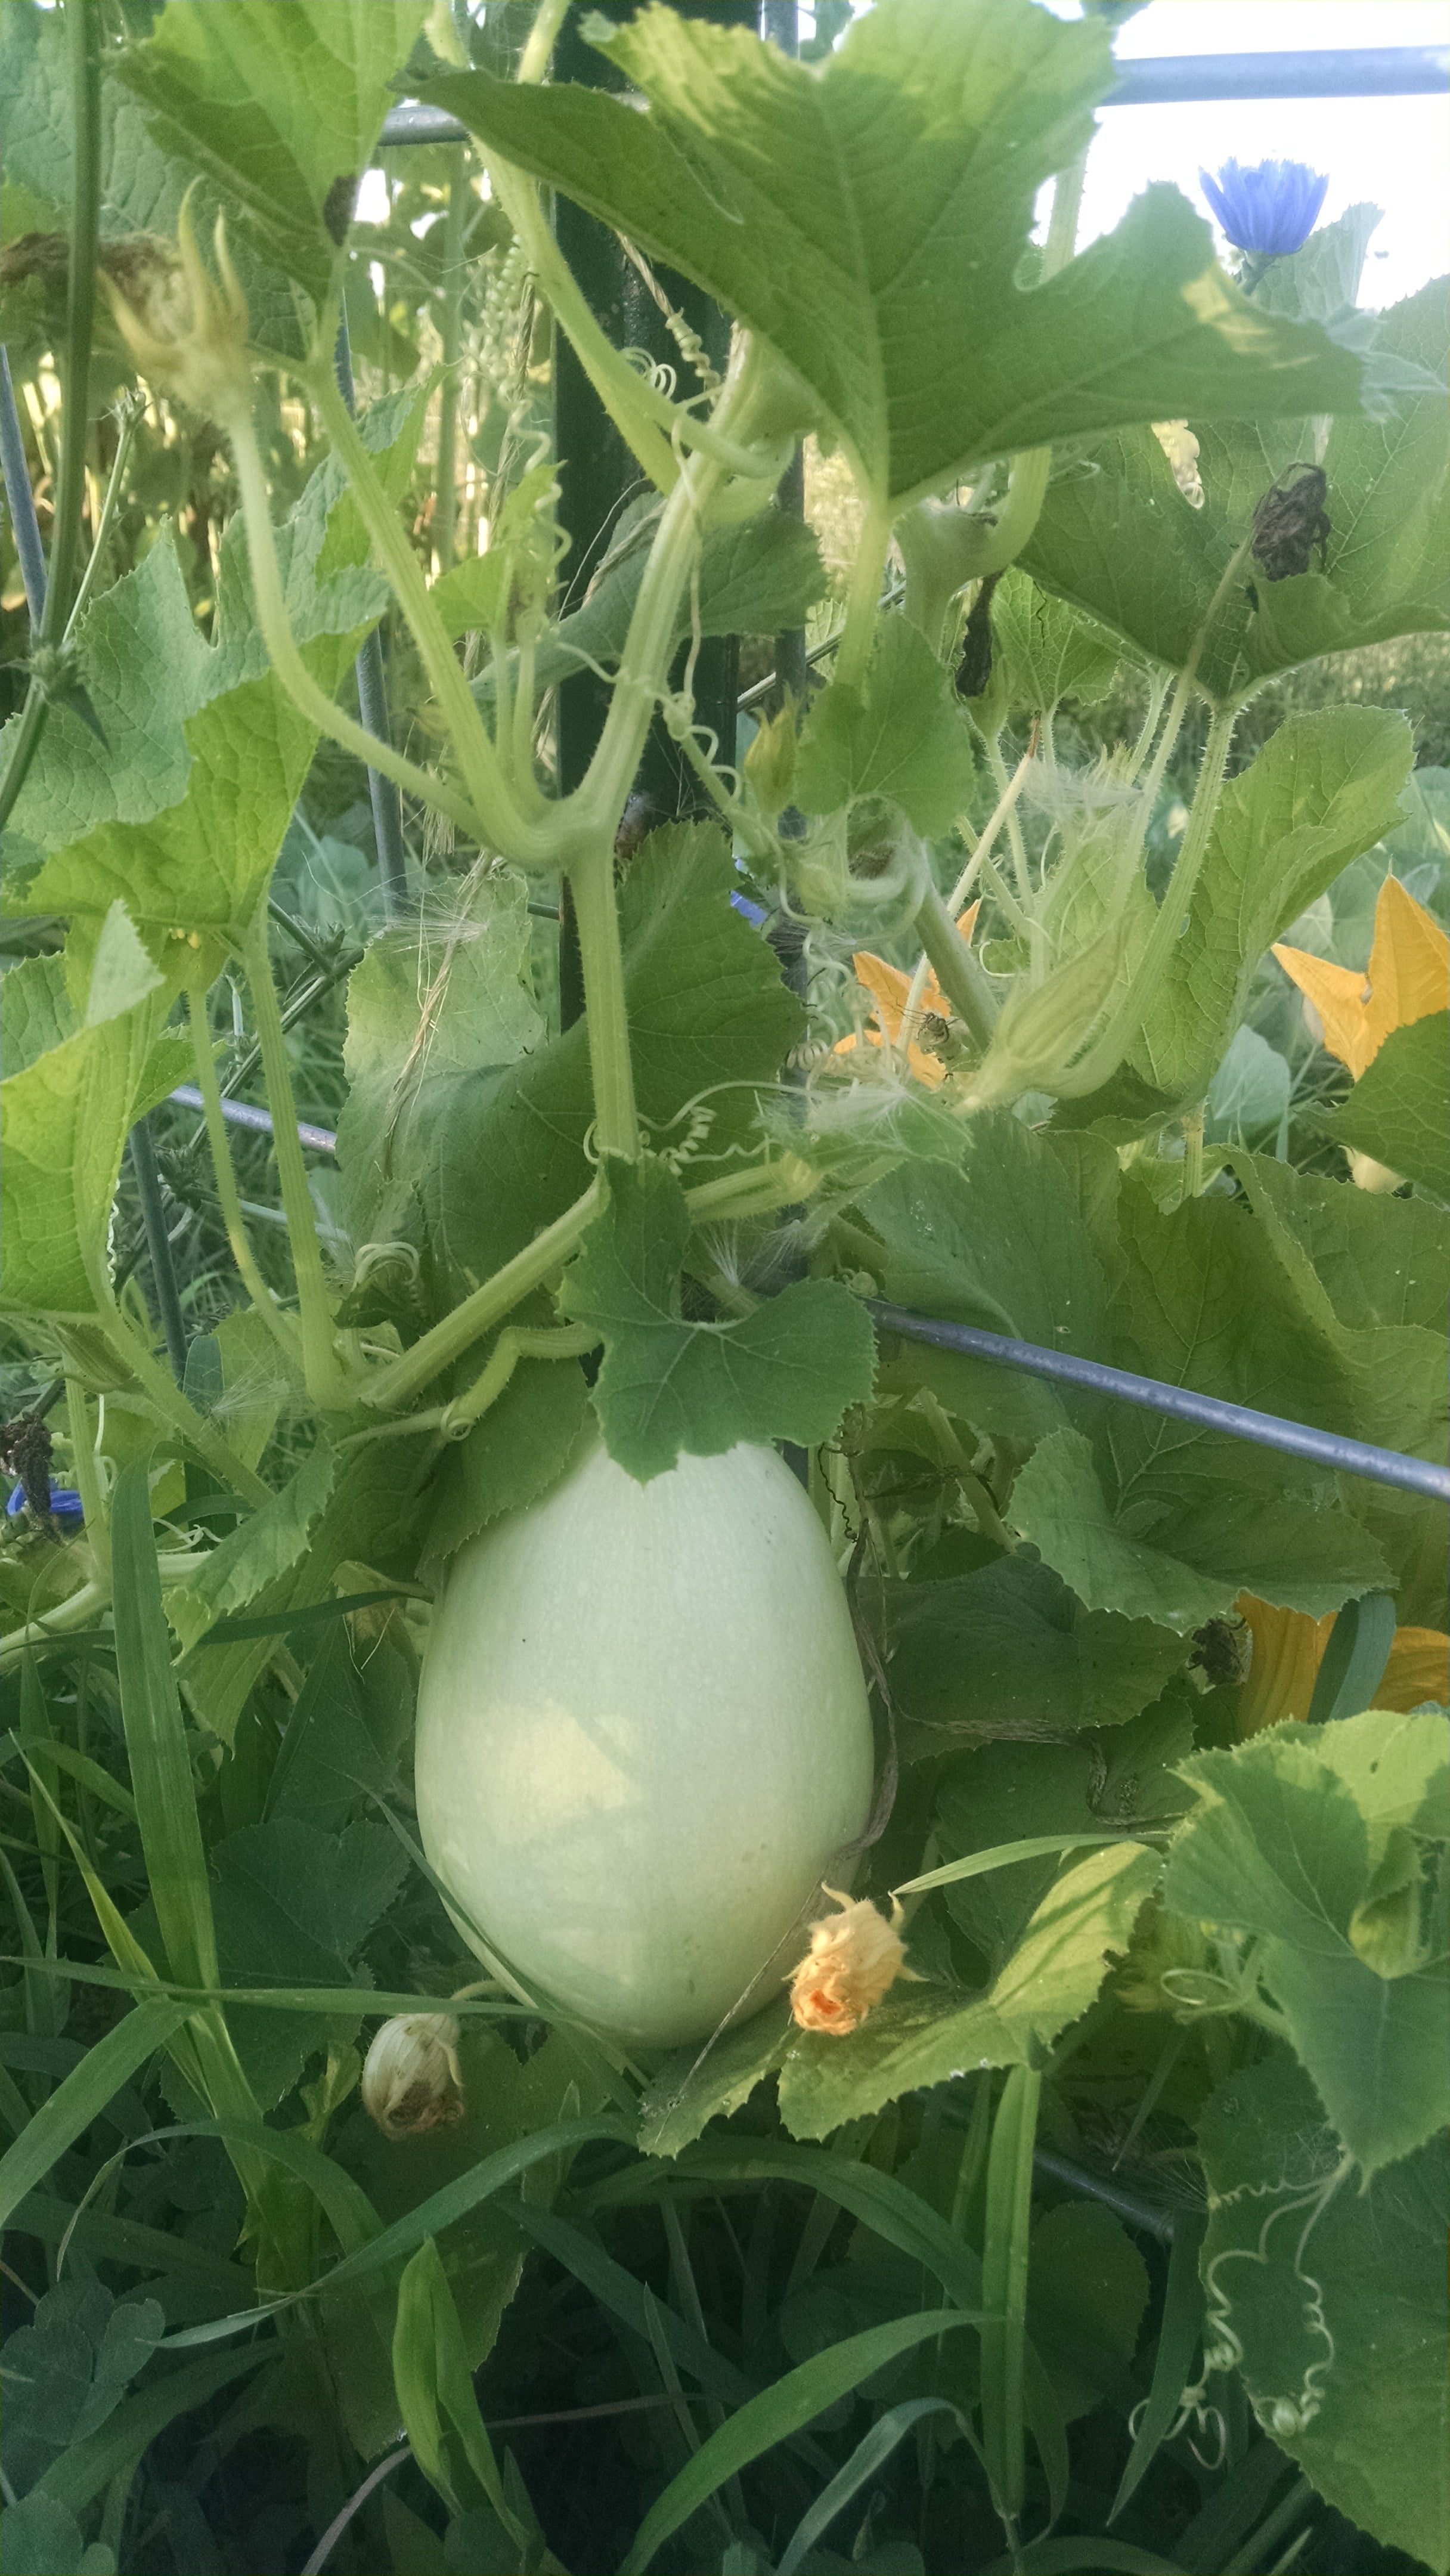 Spaghetti squash is coming along nicely.